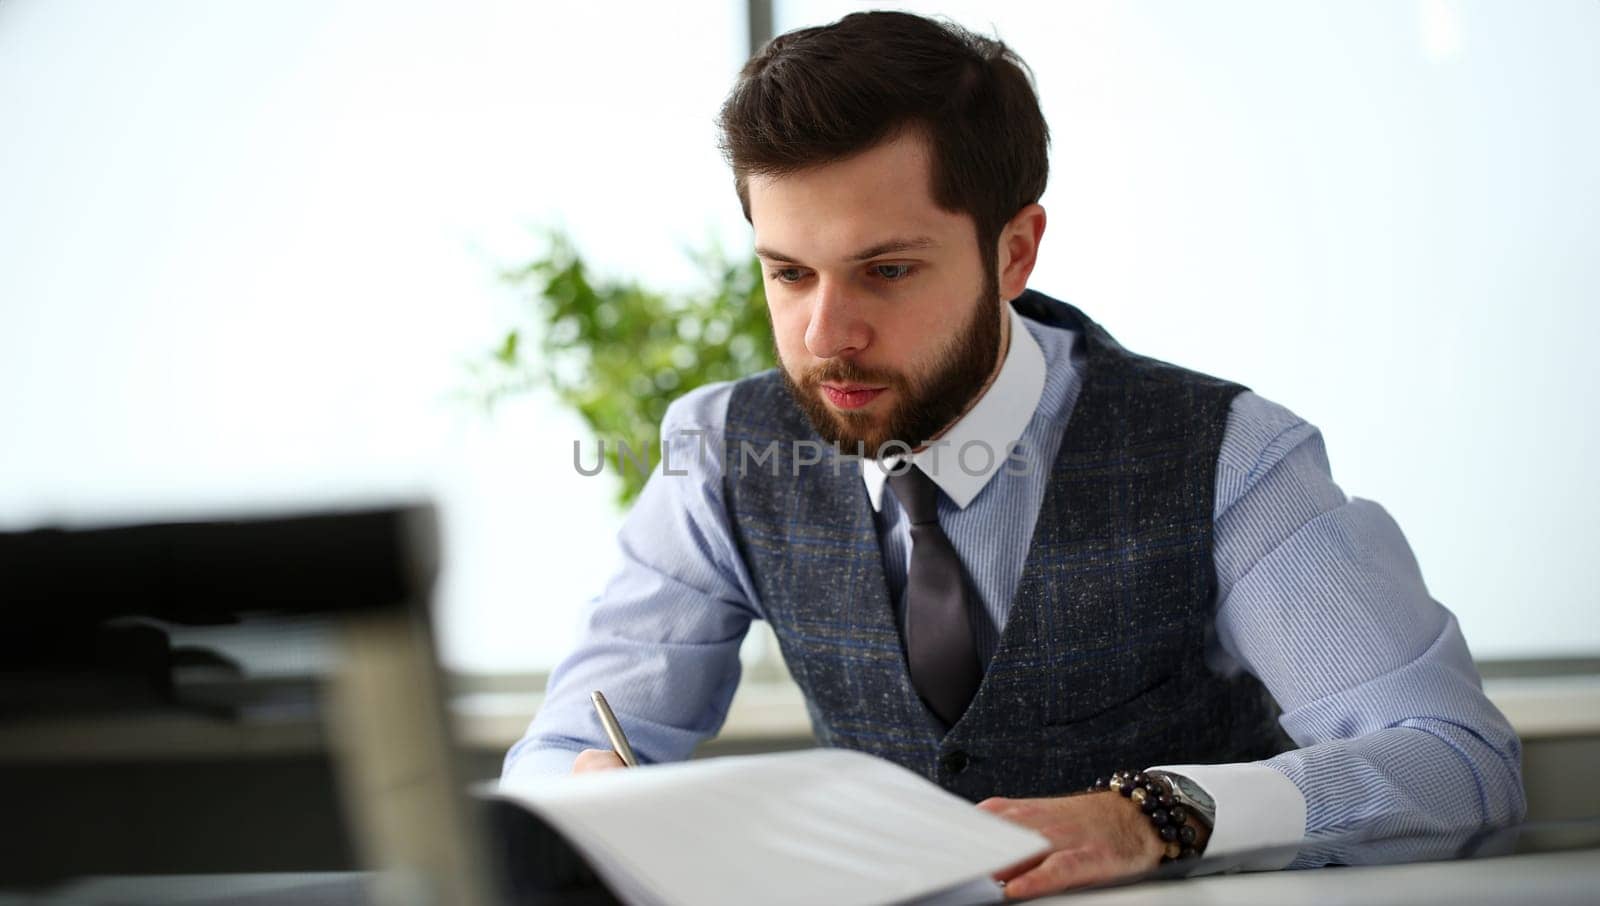 Handsome smiling bearded clerk man at office workplace with silver pen in arms do paperwork portrait. Staff dress code worker job offer client visit study profession boss market idea coach training